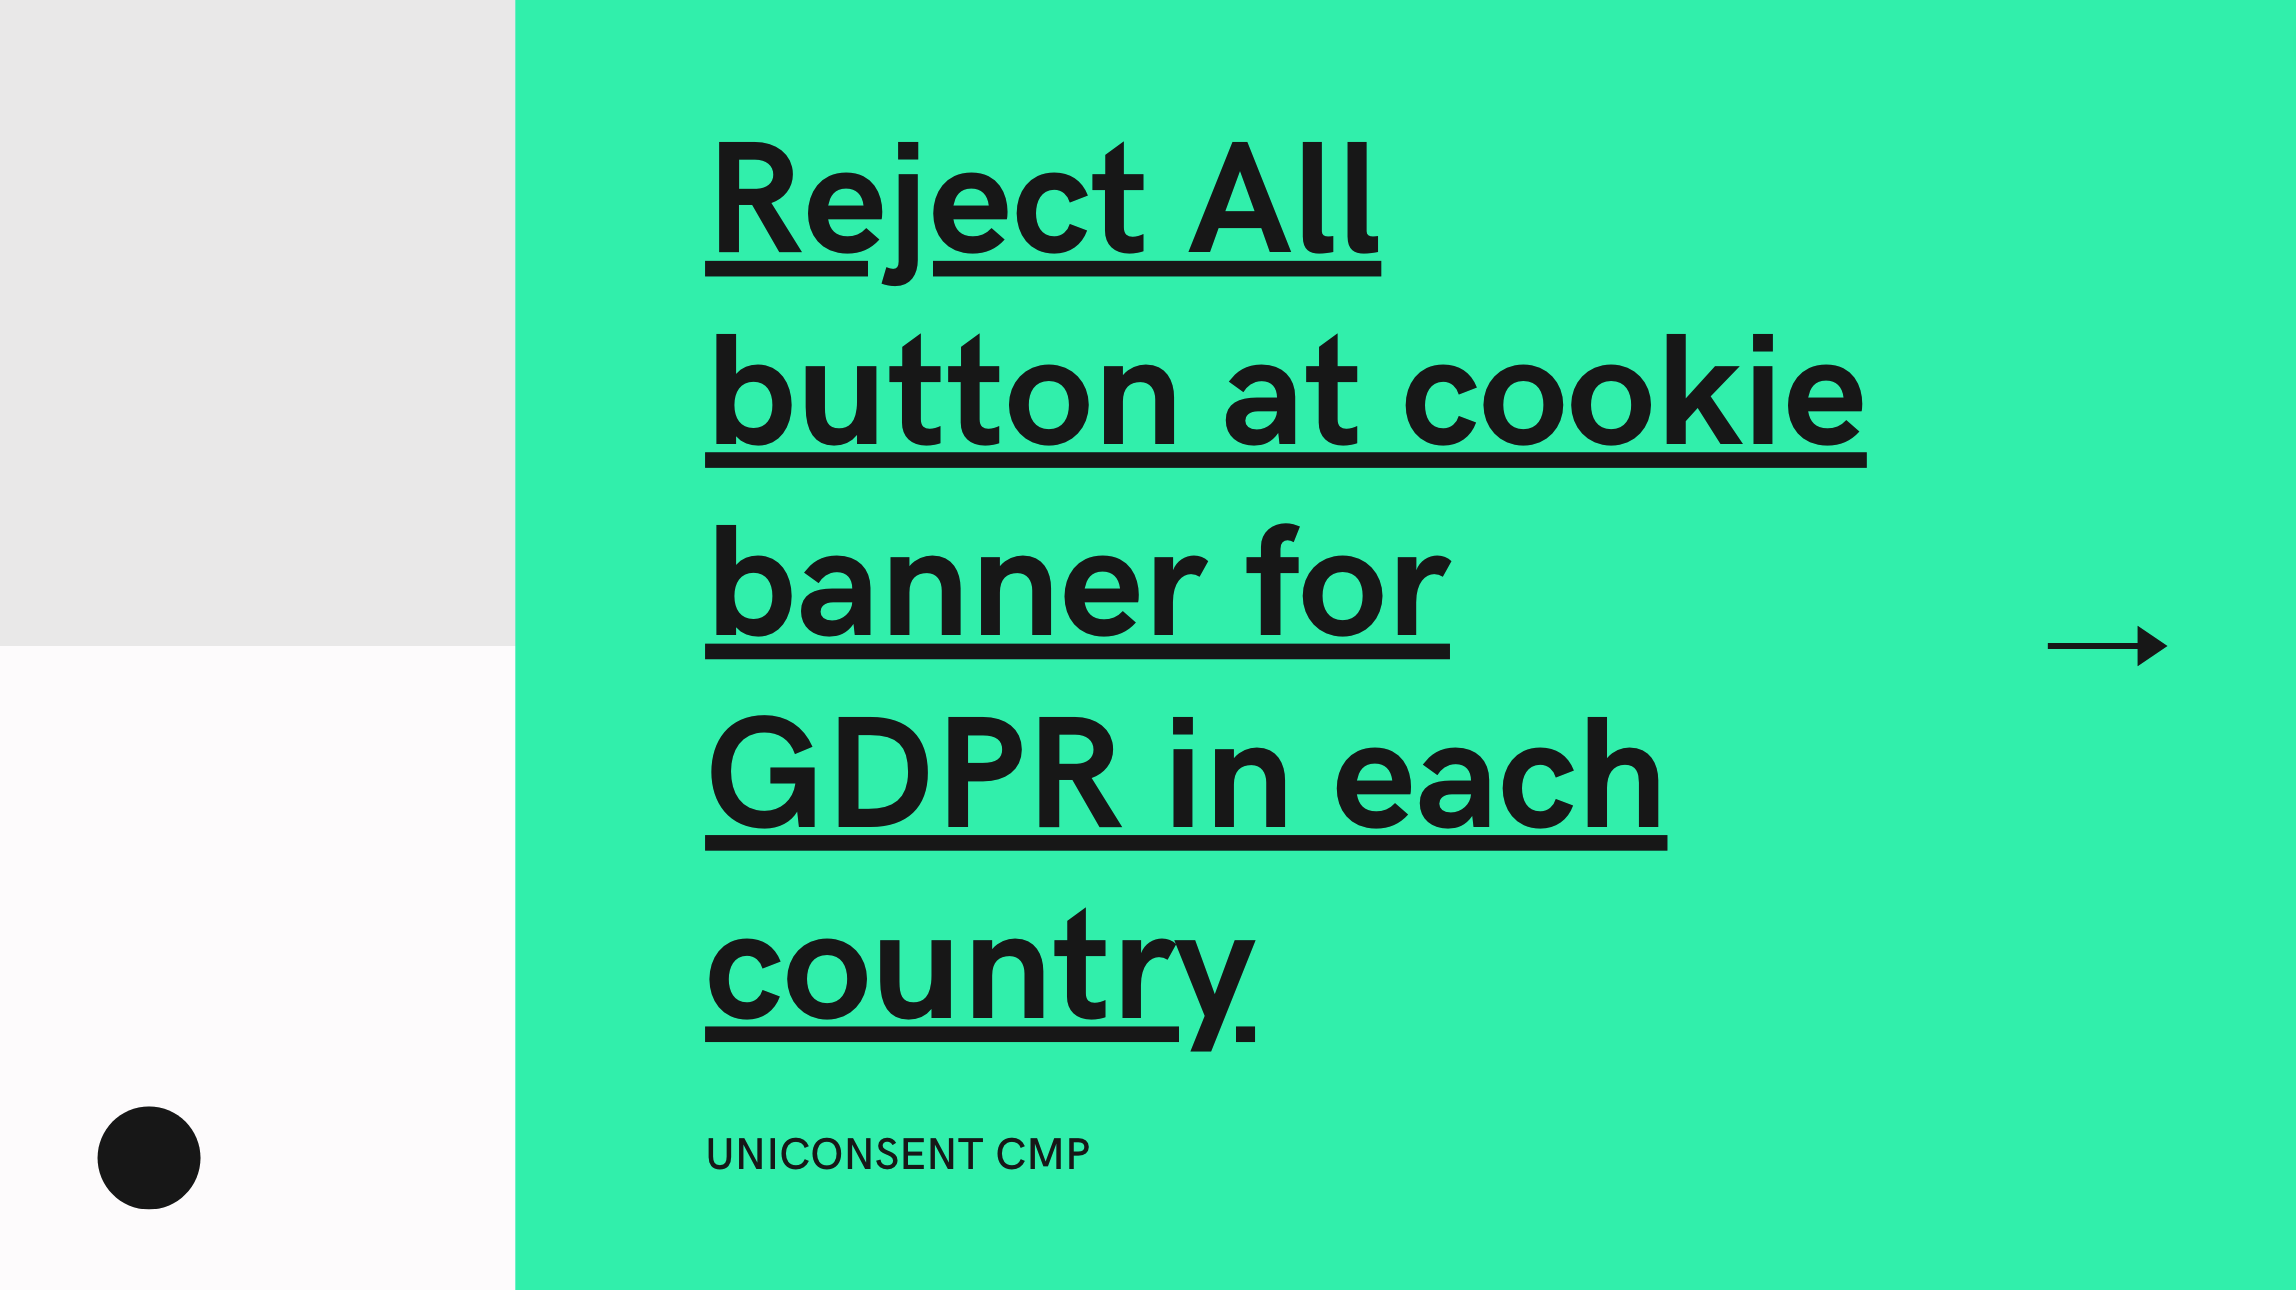 Reject All button at cookie banner for GDPR in each country